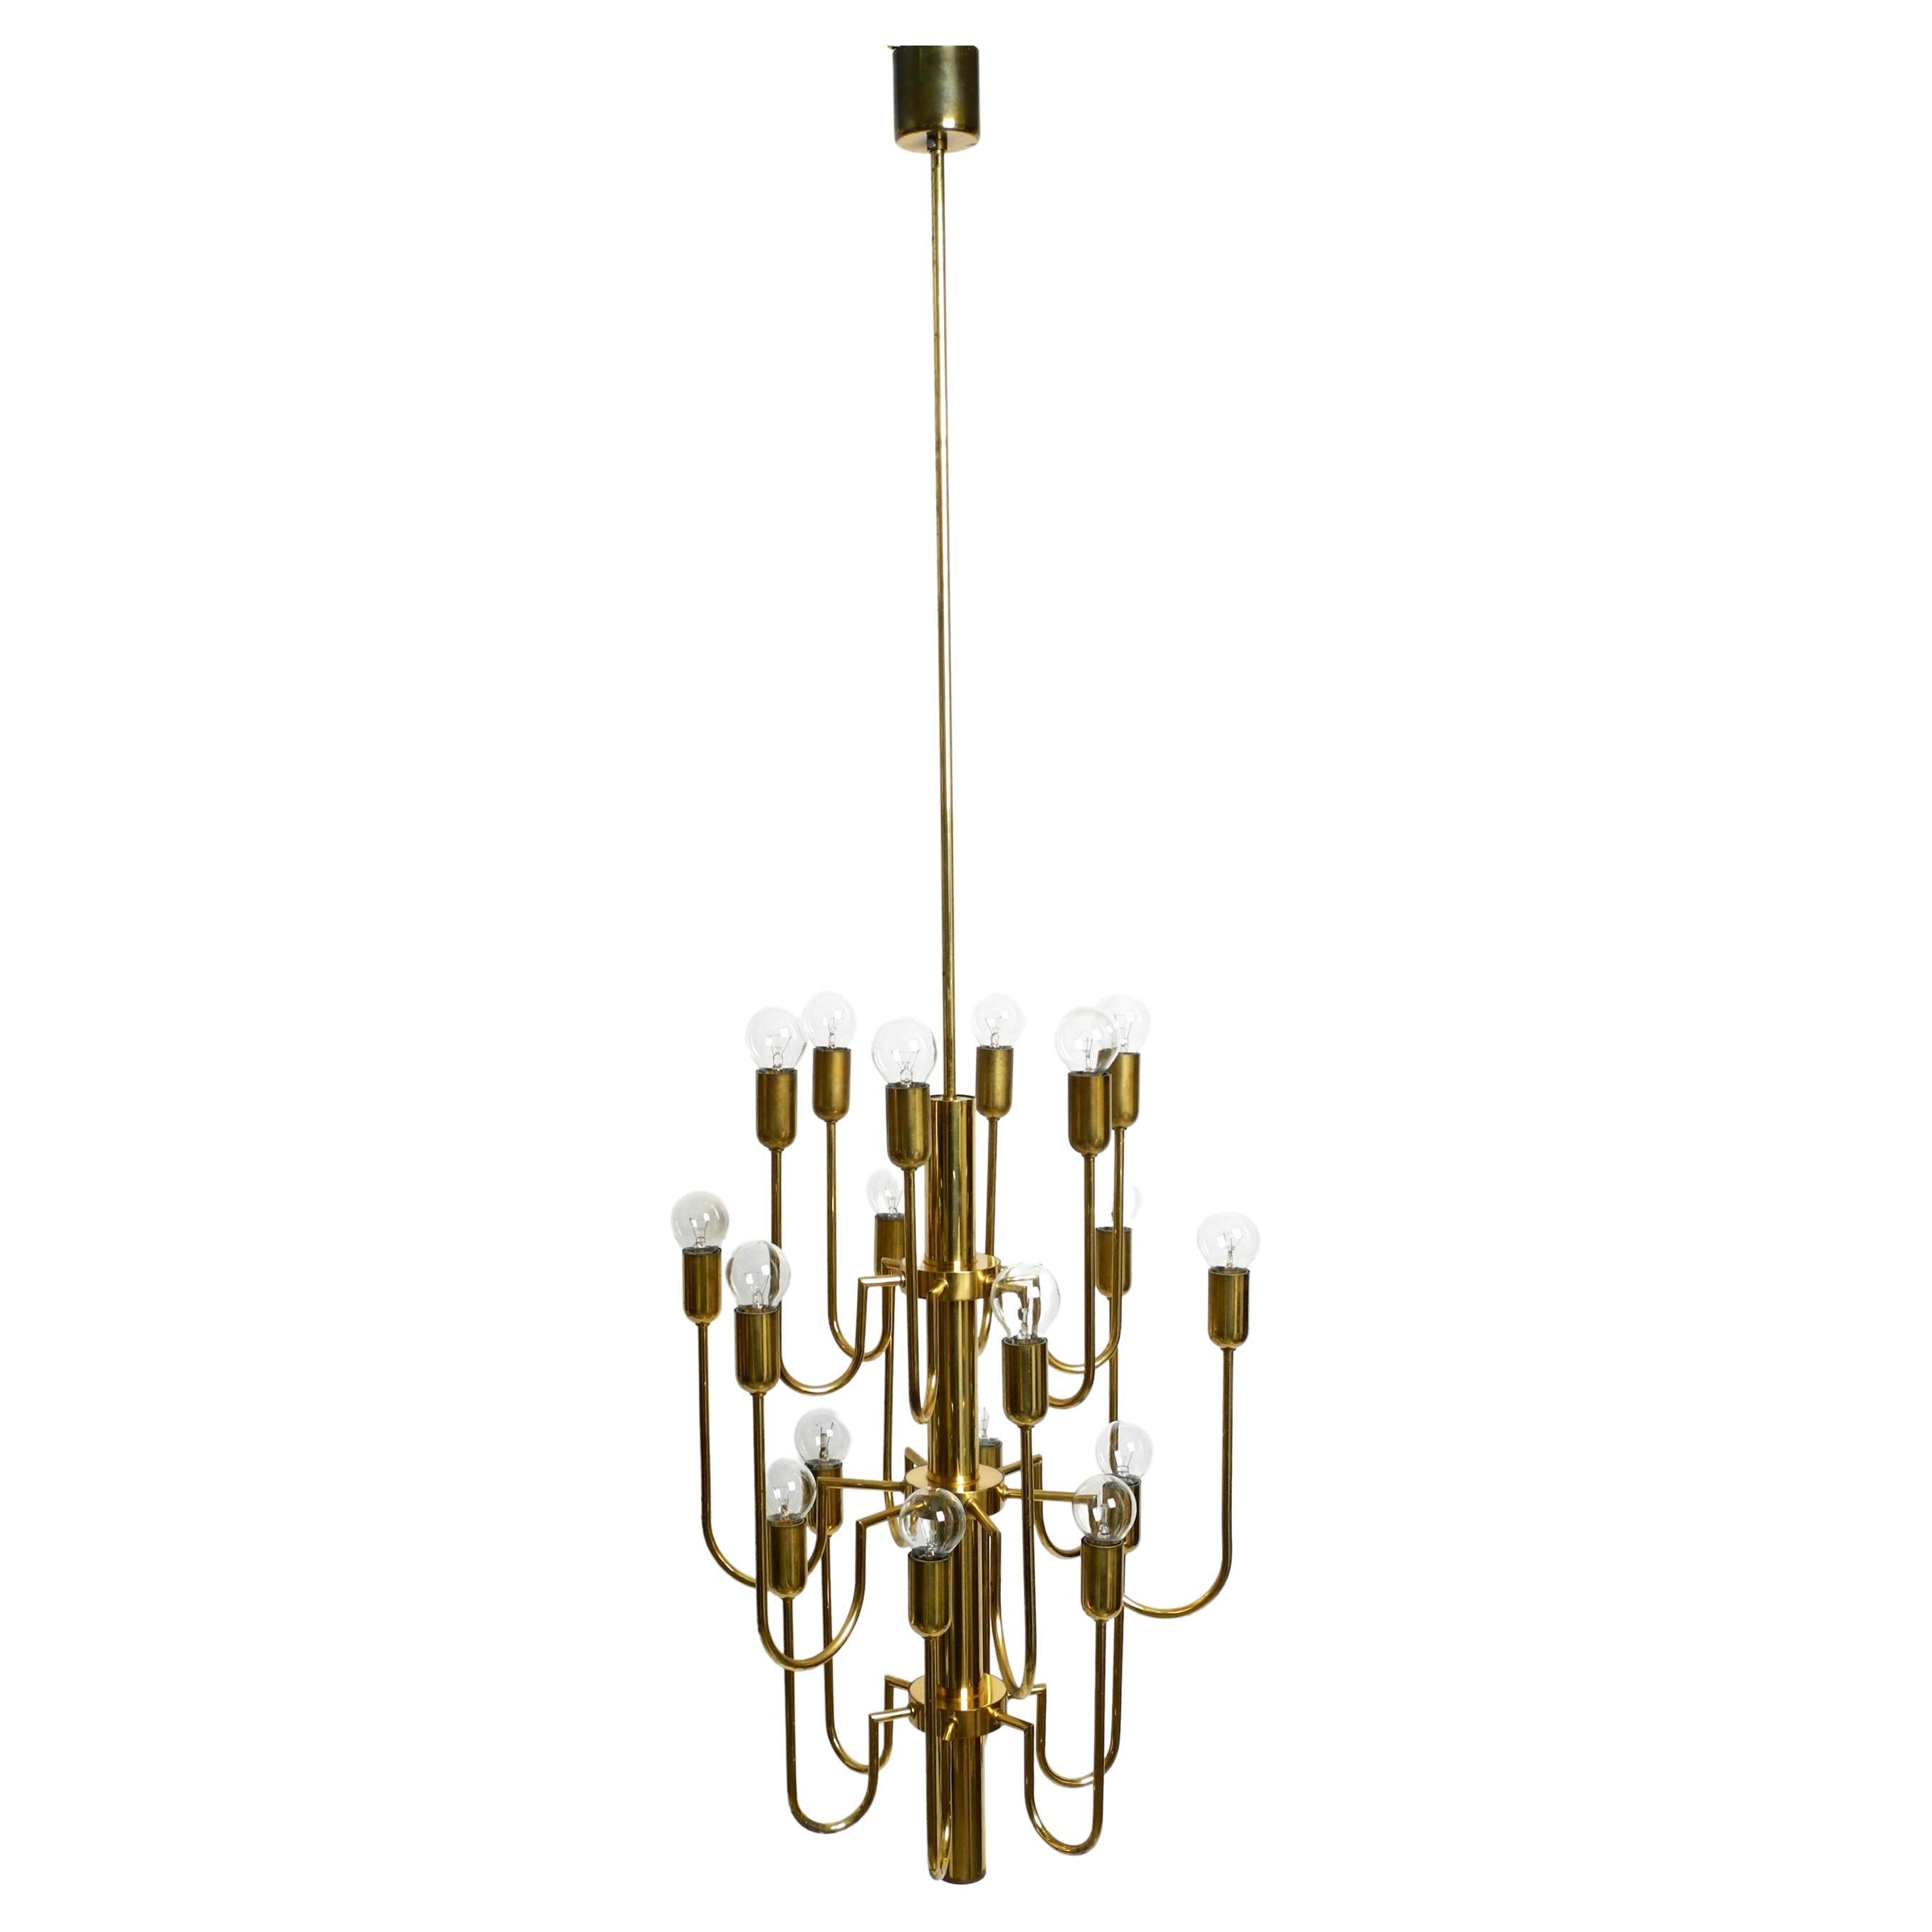 Beautiful Three Staged 18 Arm Midcentury Brass Chandelier with a Long Brass Rod For Sale